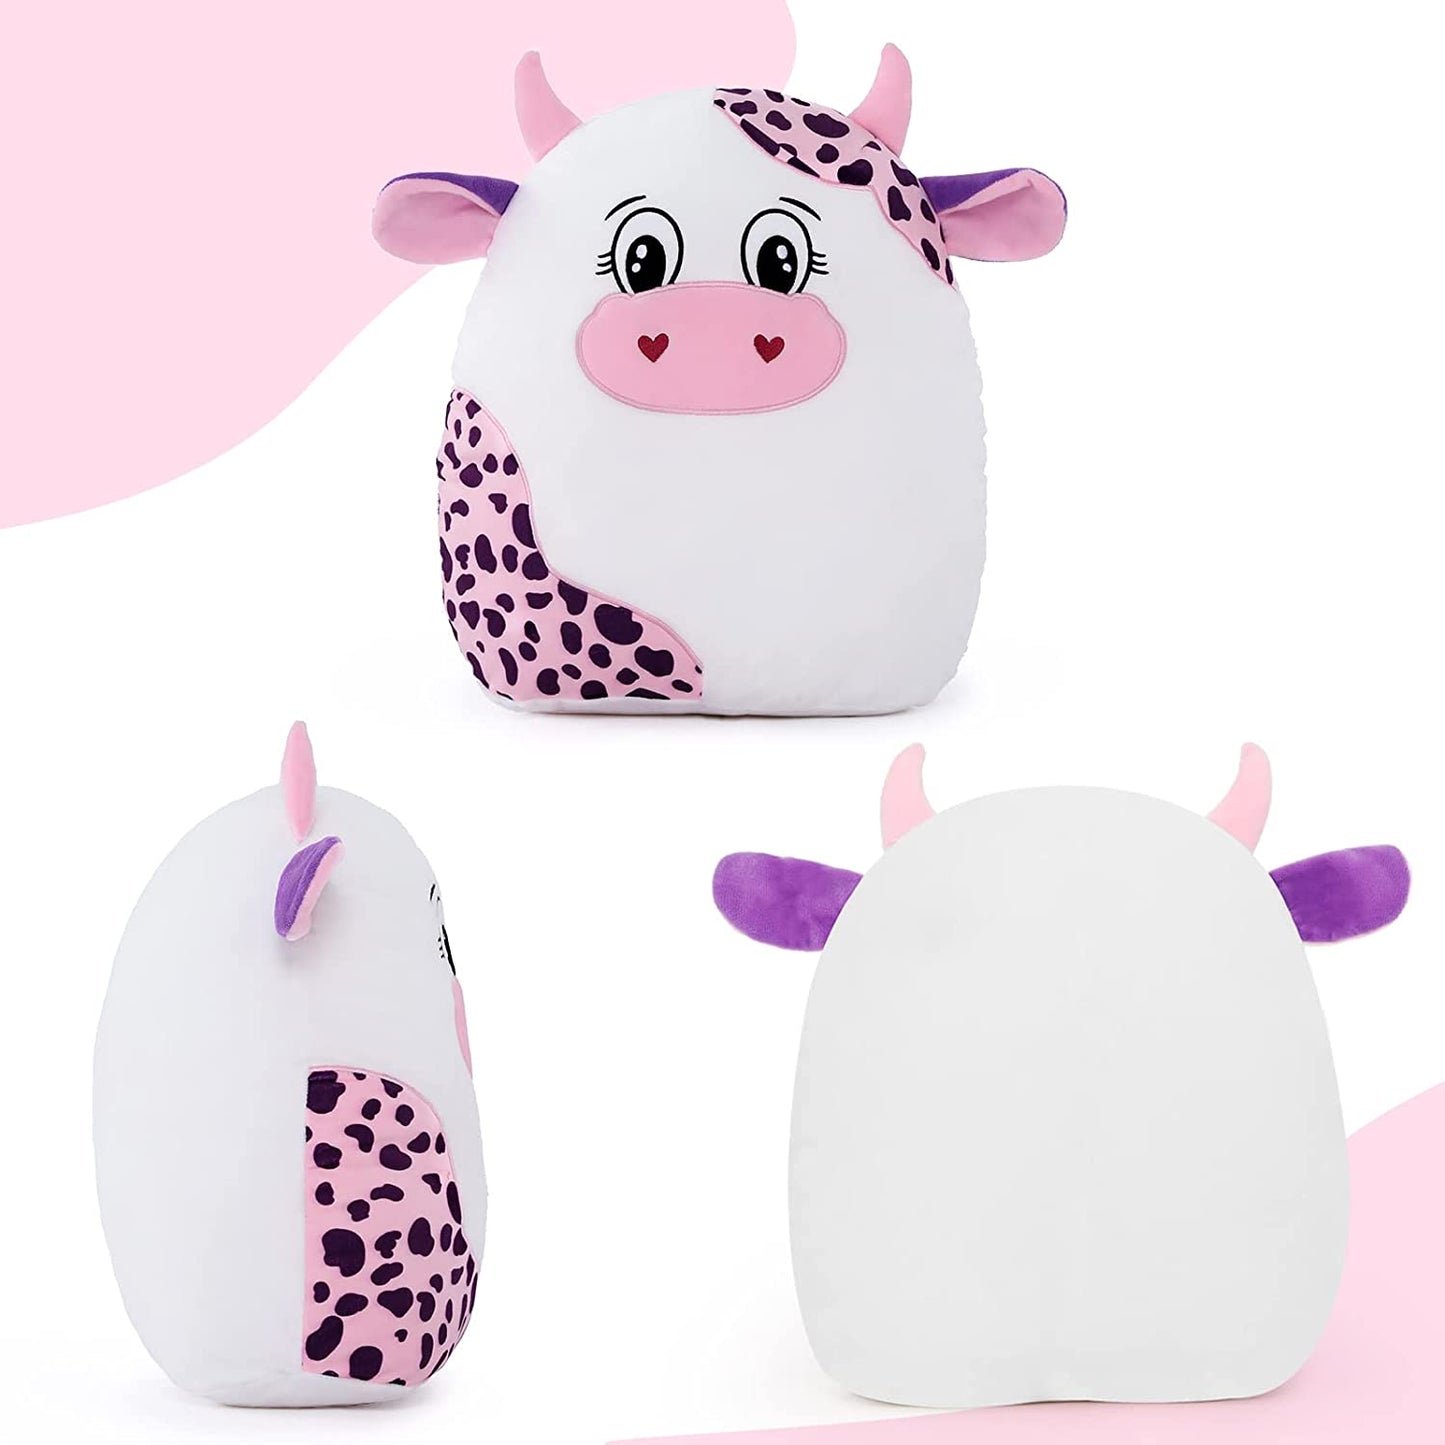 Cow Plush Toy Cattle Throw Pillow, 16/20 Inches - MorisMos Stuffed Animals - Free Shipping